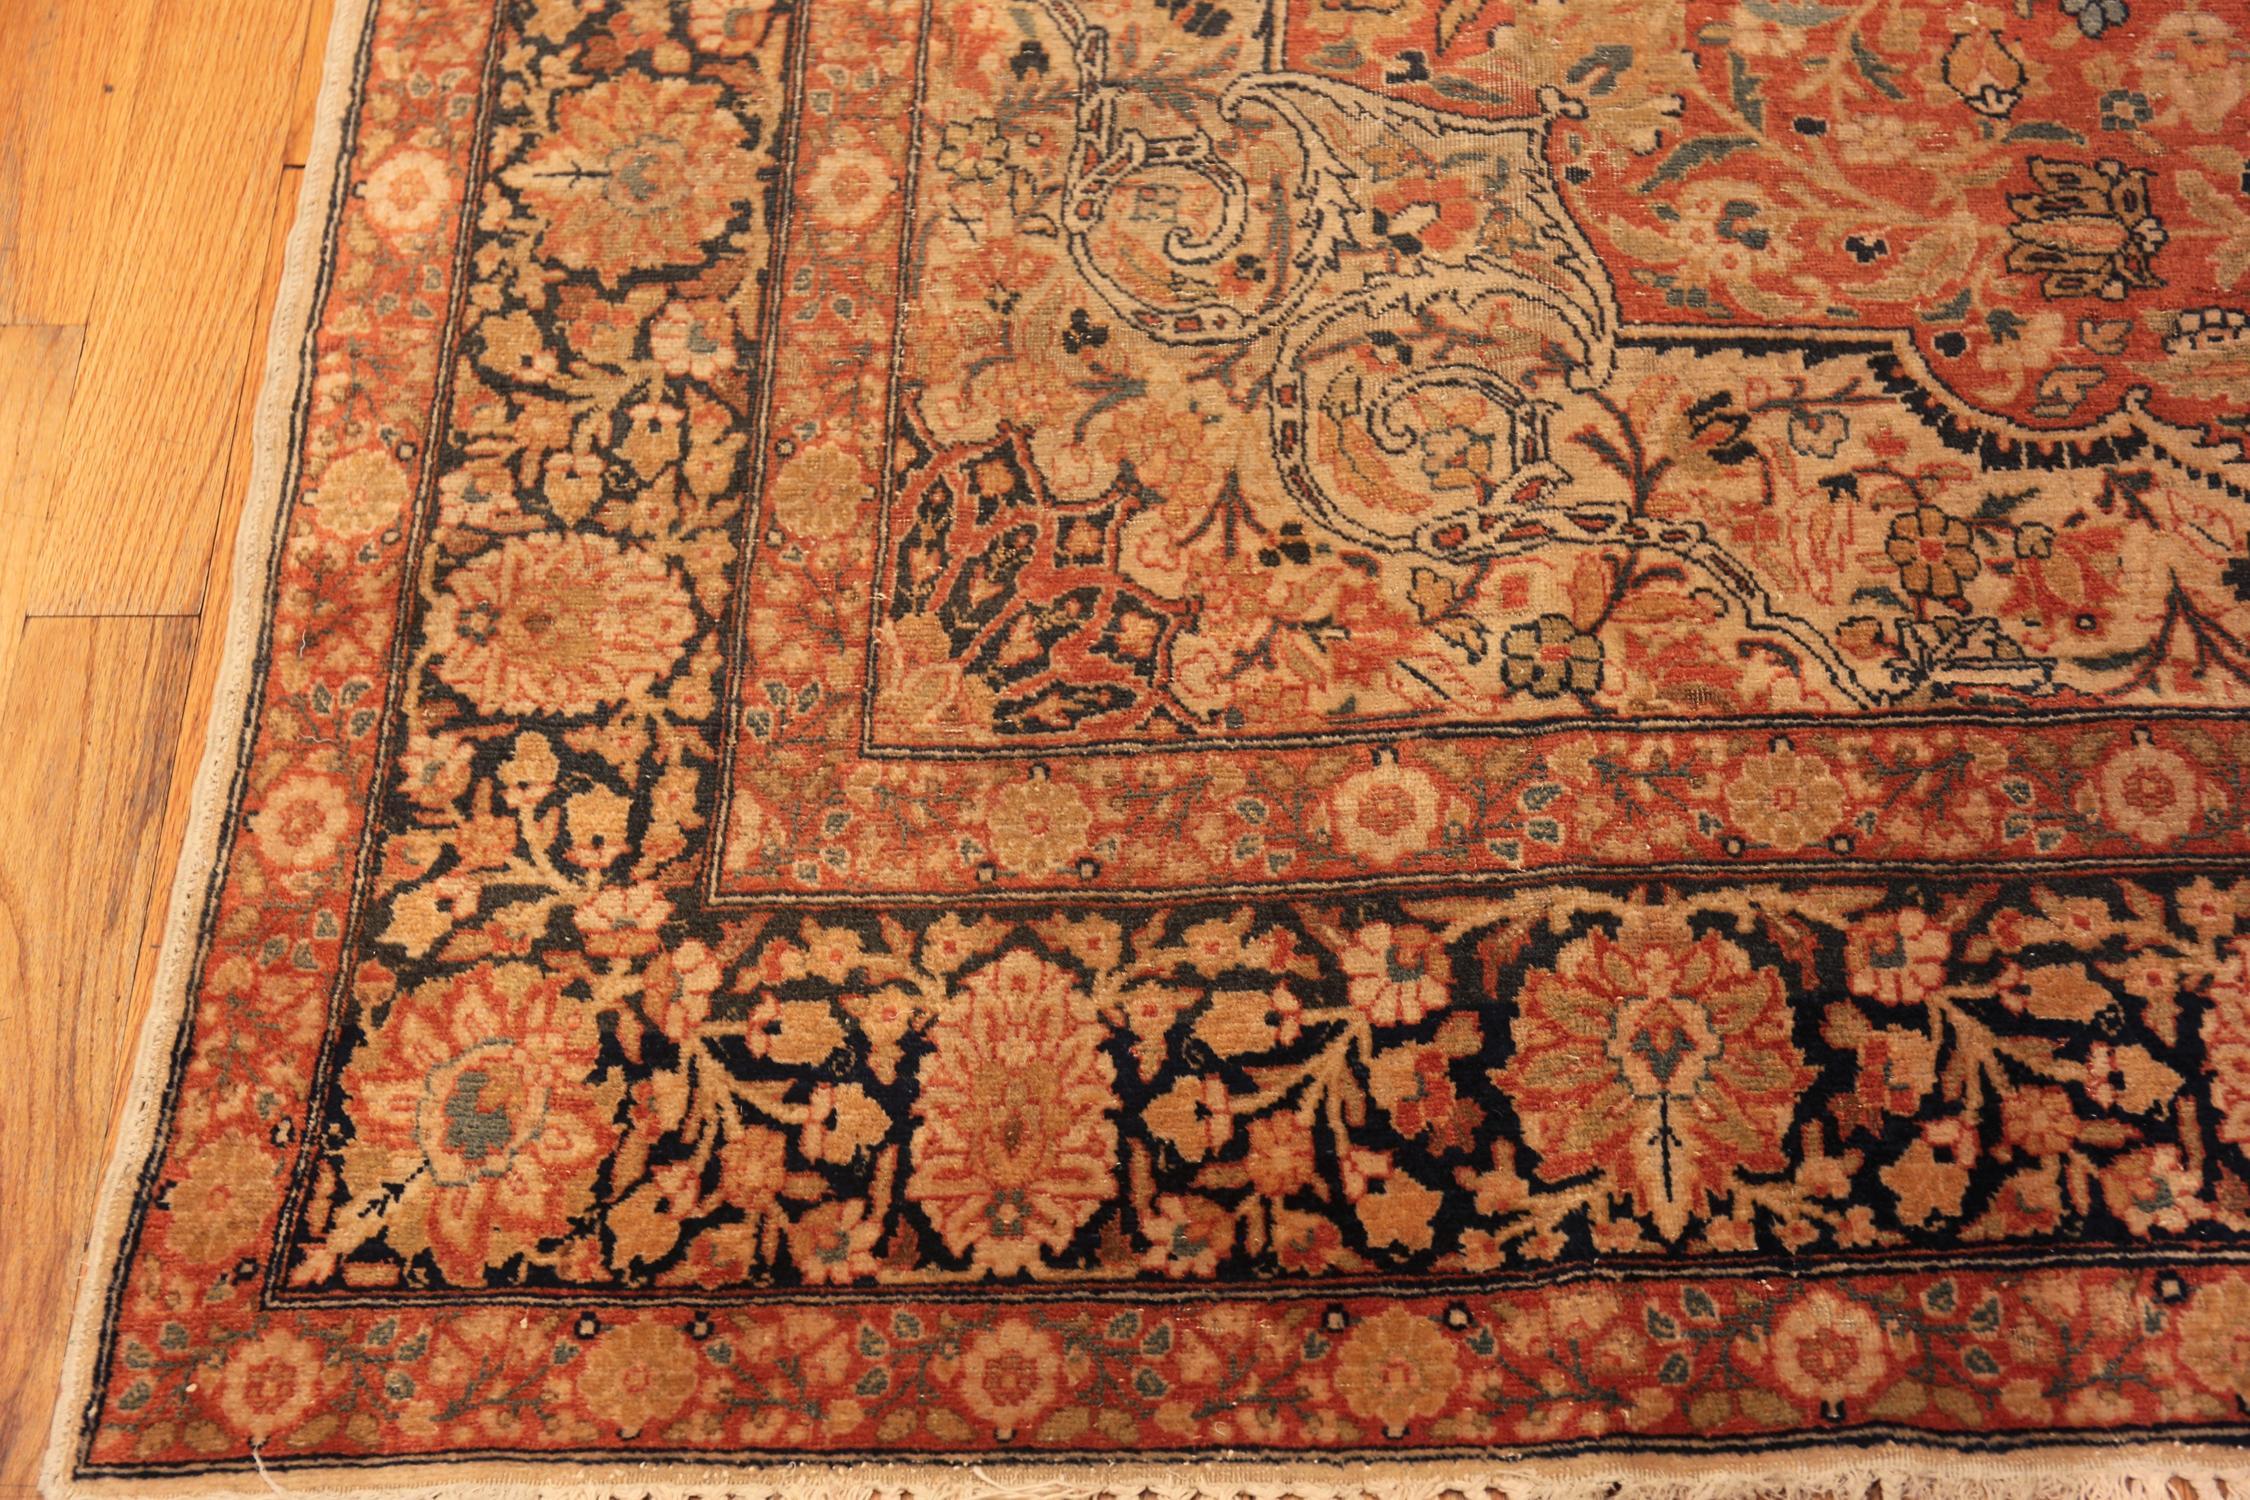 Hand-Knotted Extremely Impressive Antique Persian Tabriz Floral Area Rug 8'4